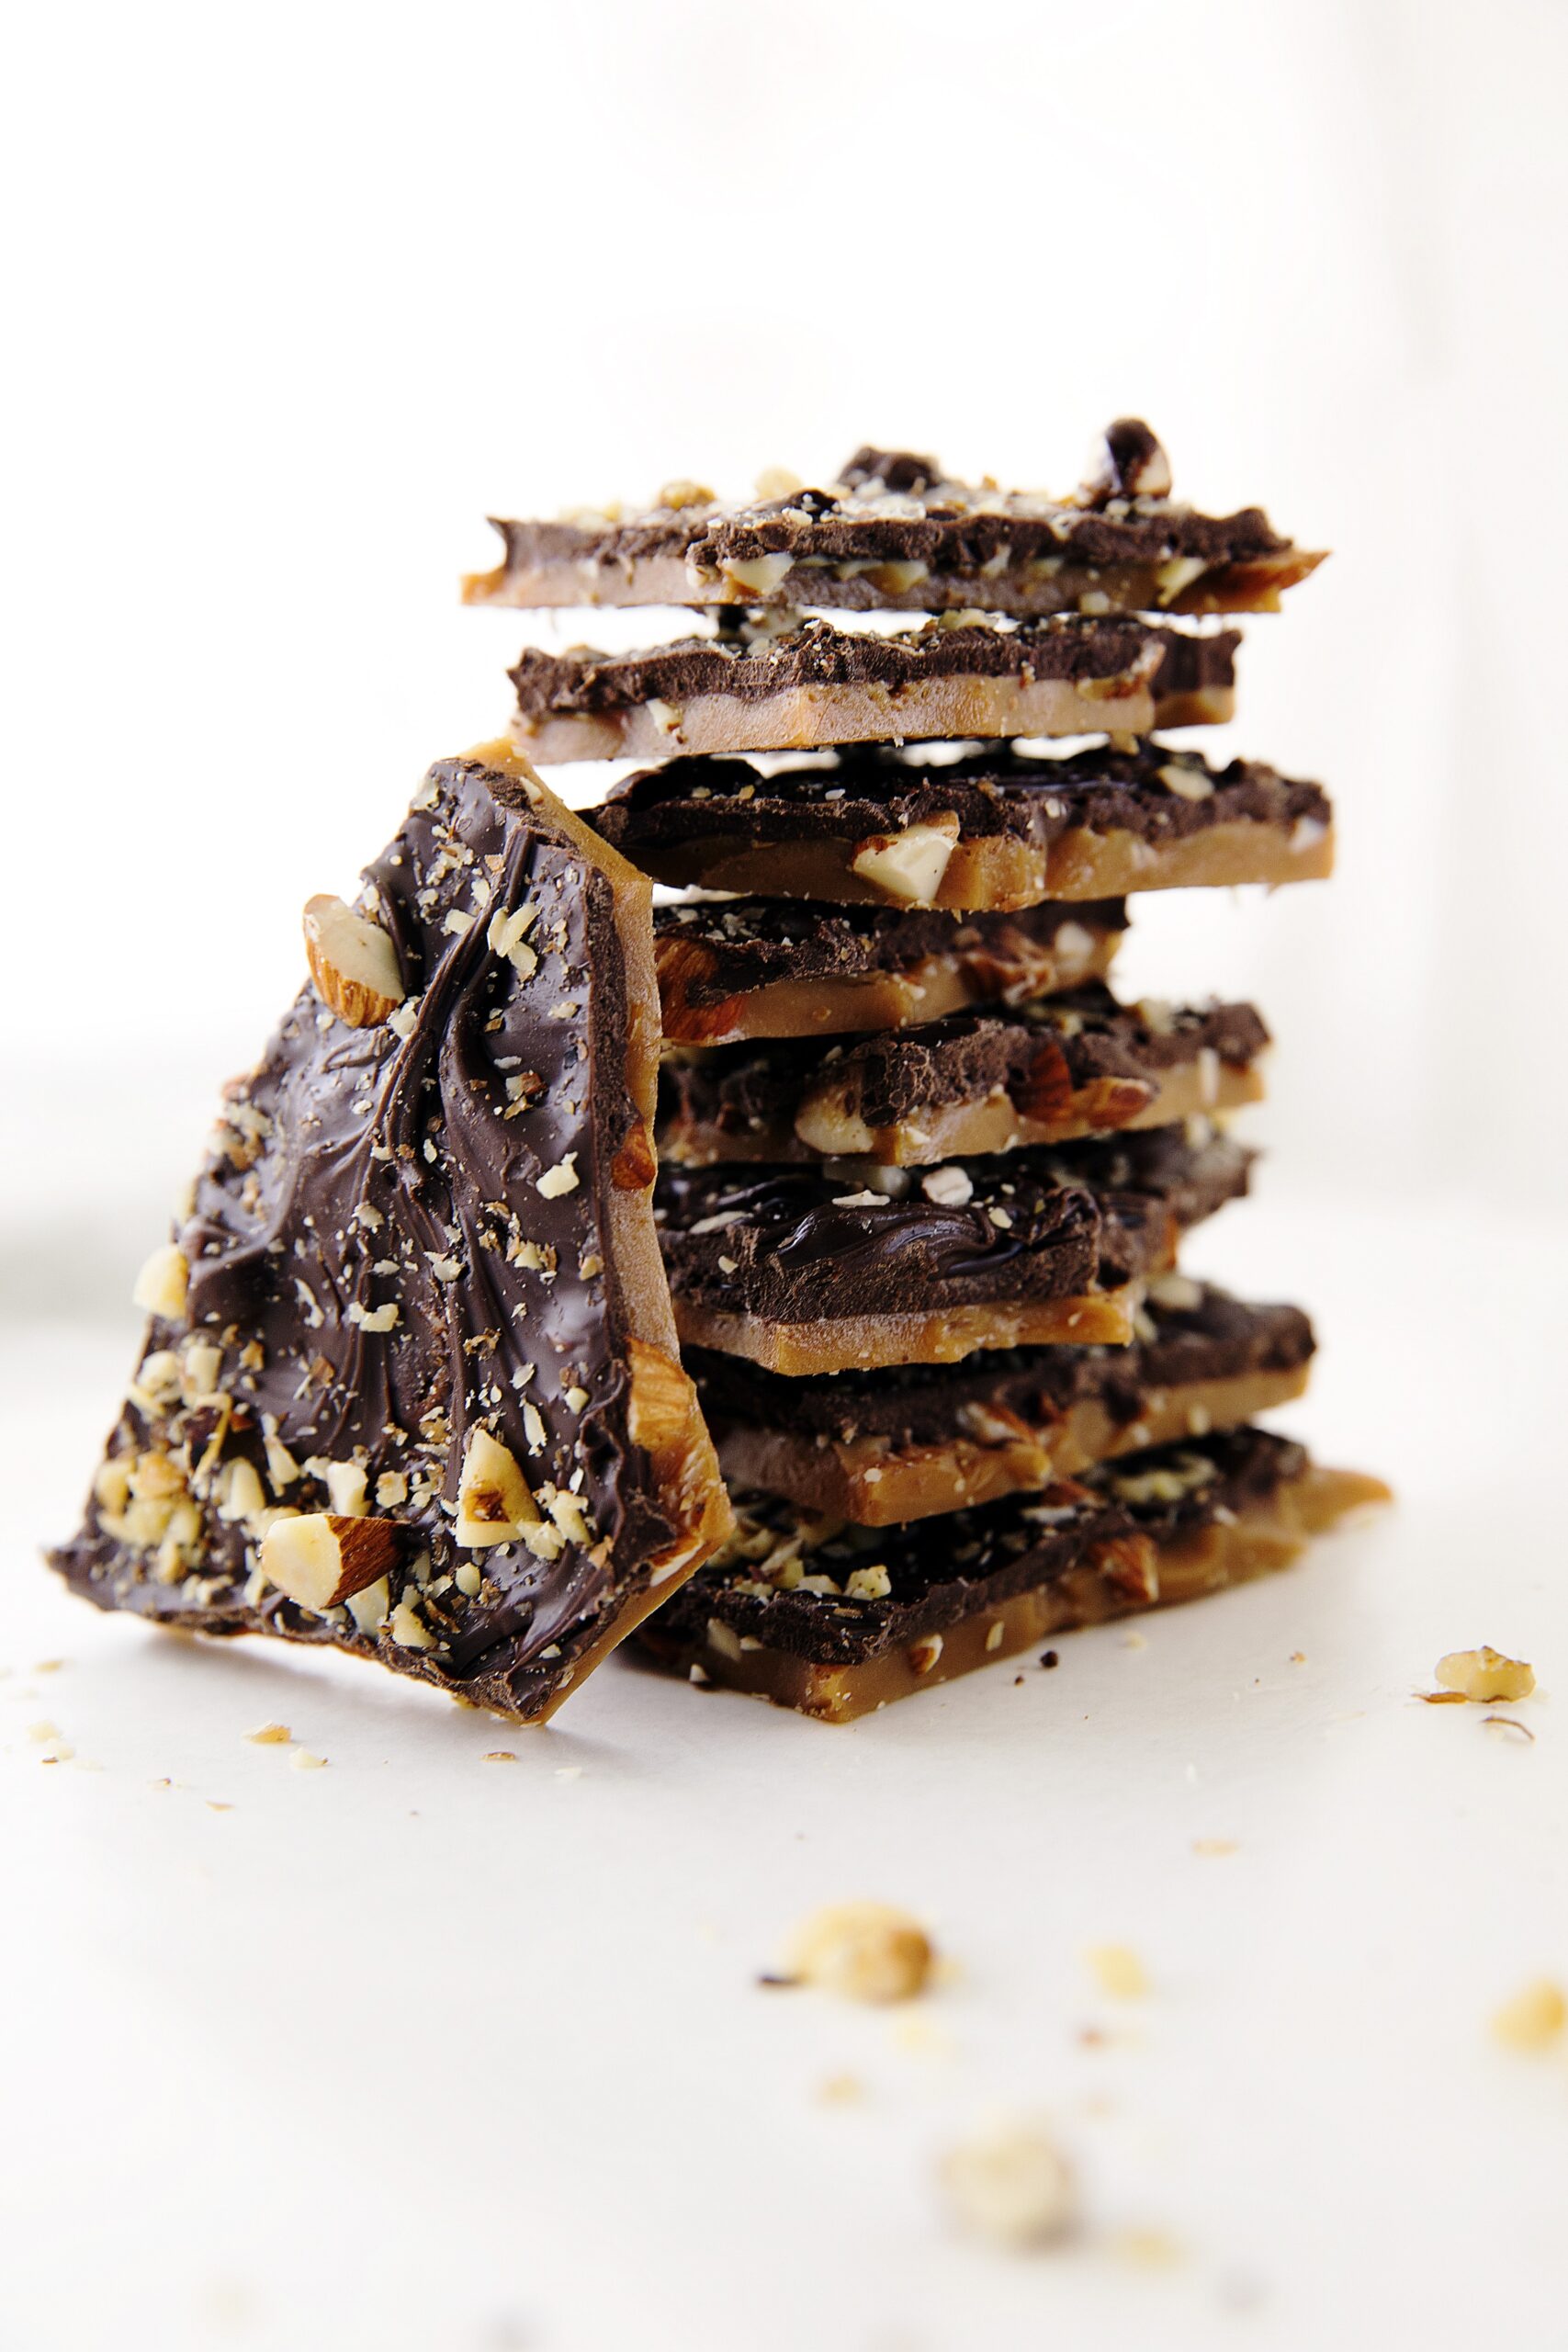 5 ingredient English Toffee Bark: 25 minutes is all it takes for one of the most addicting recipes I know! | via Broma Bakery | #englishtoffee #toffeebark